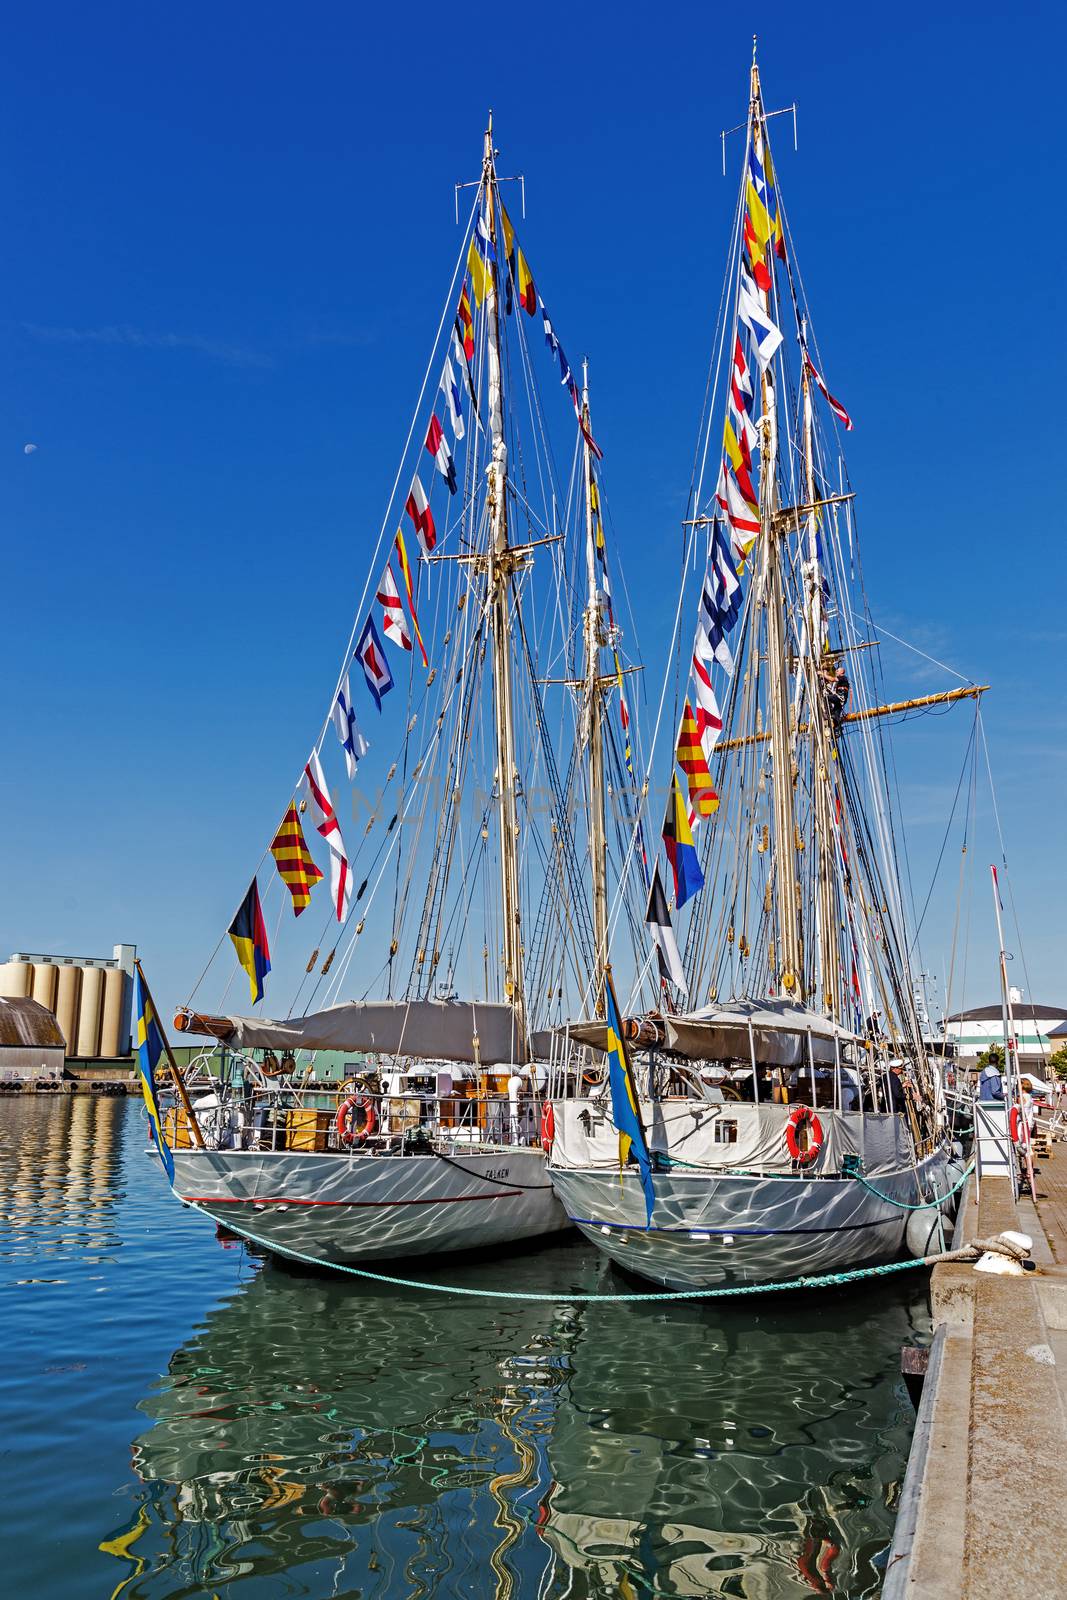 Sailing boats moored in the Port of Ystad during Nordic Cadet Meeting (NOCA) – annual event arranged by naval warfare academies of Sweden, Norway, Denmark and Finland.